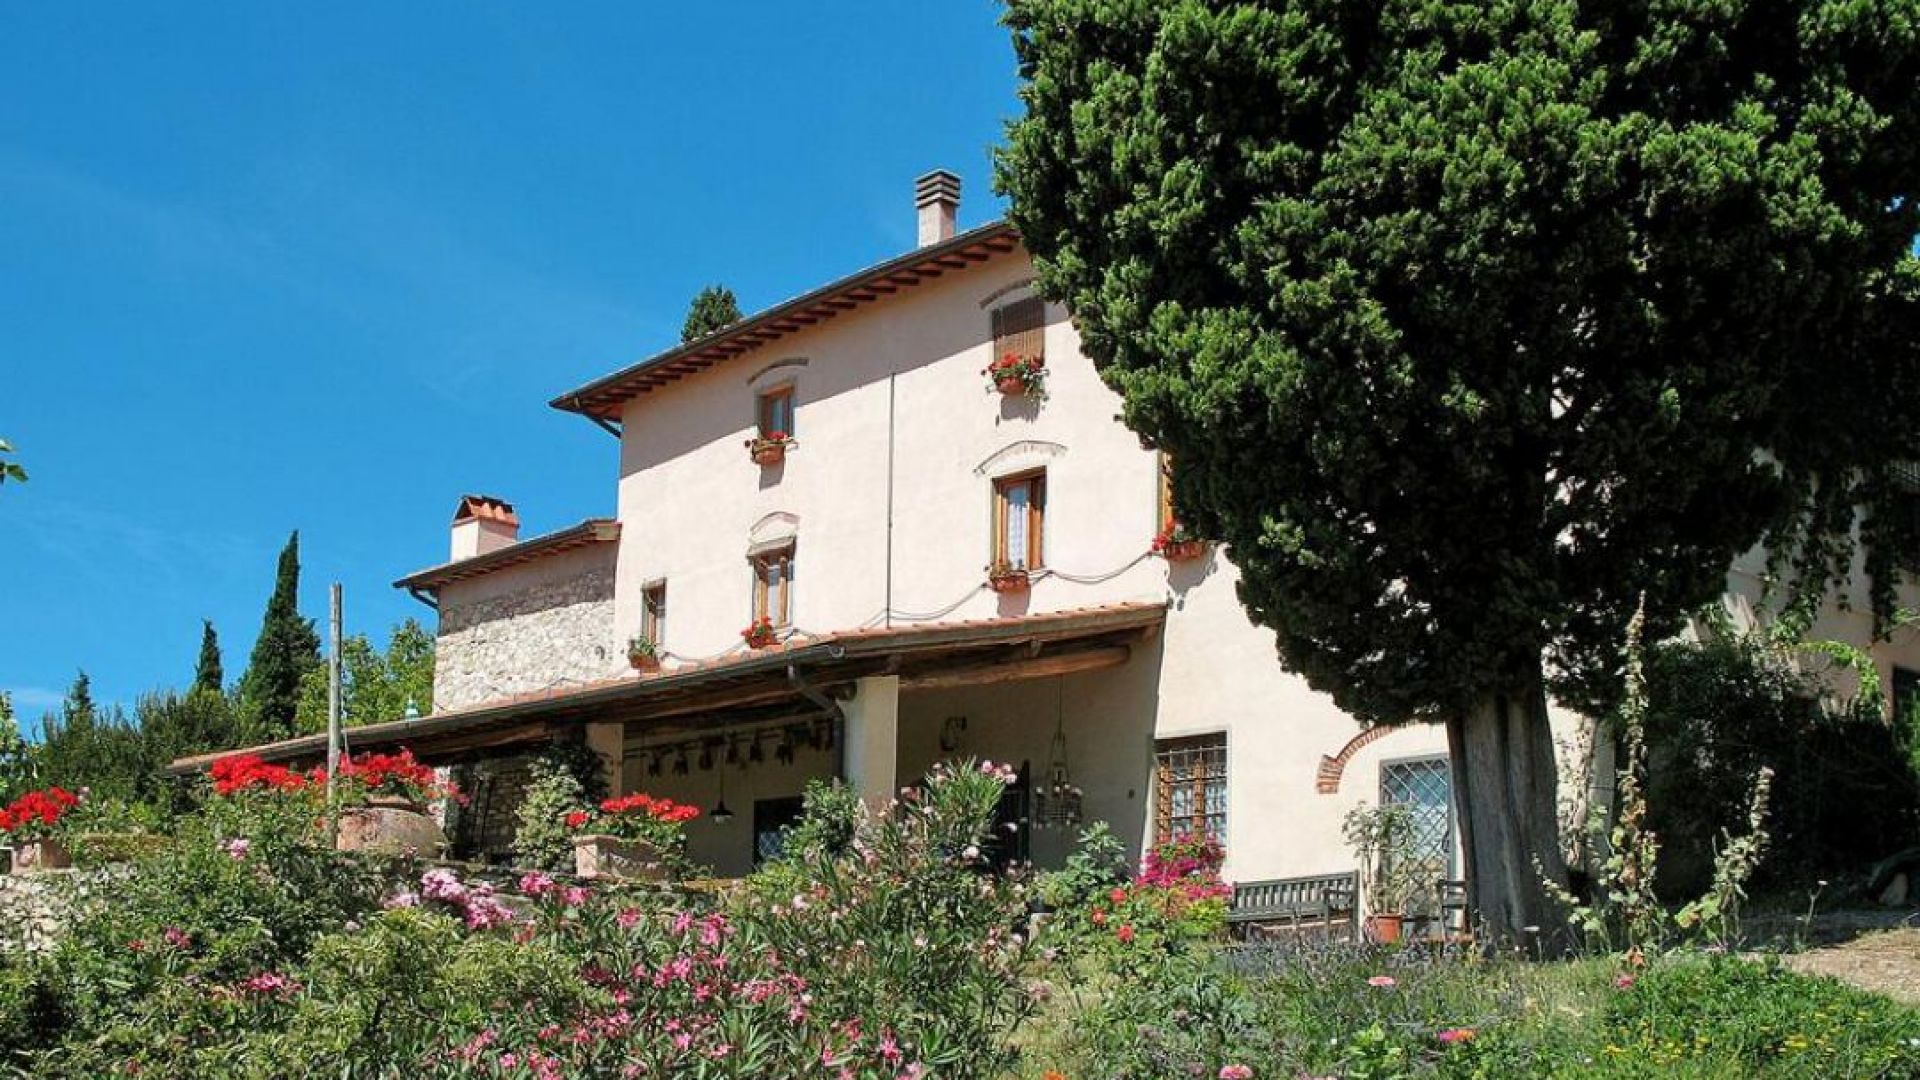 For sale cottage in  Firenze Toscana